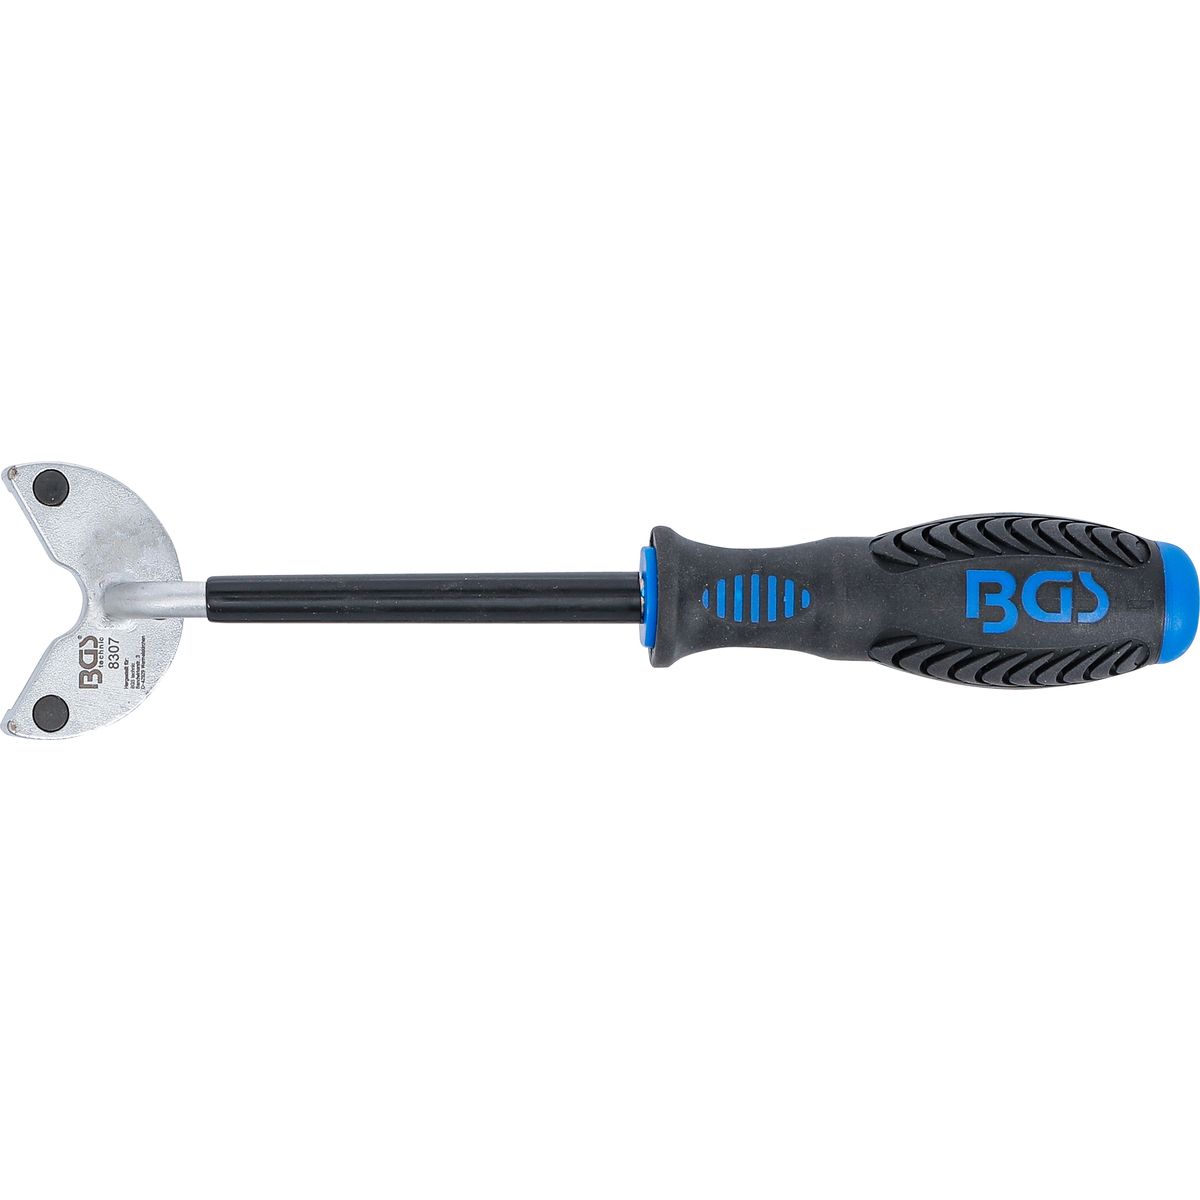 Shock Absorber Wrench | for Shock Absorber Screwing on Mercedes-Benz